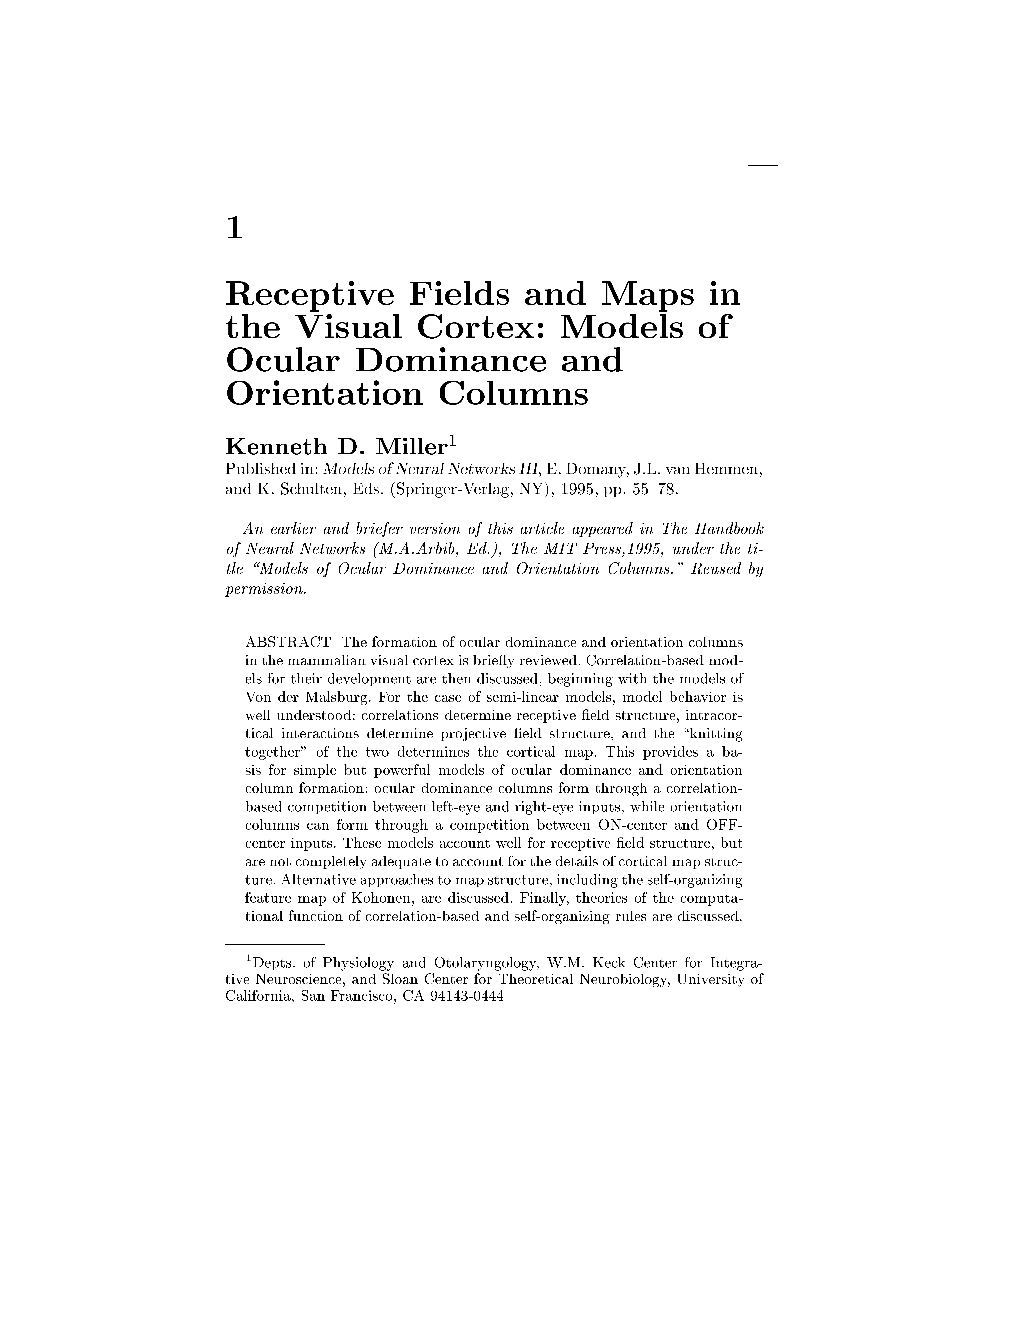 1 Receptive Fields and Maps in the Visual Cortex: Models of Ocular